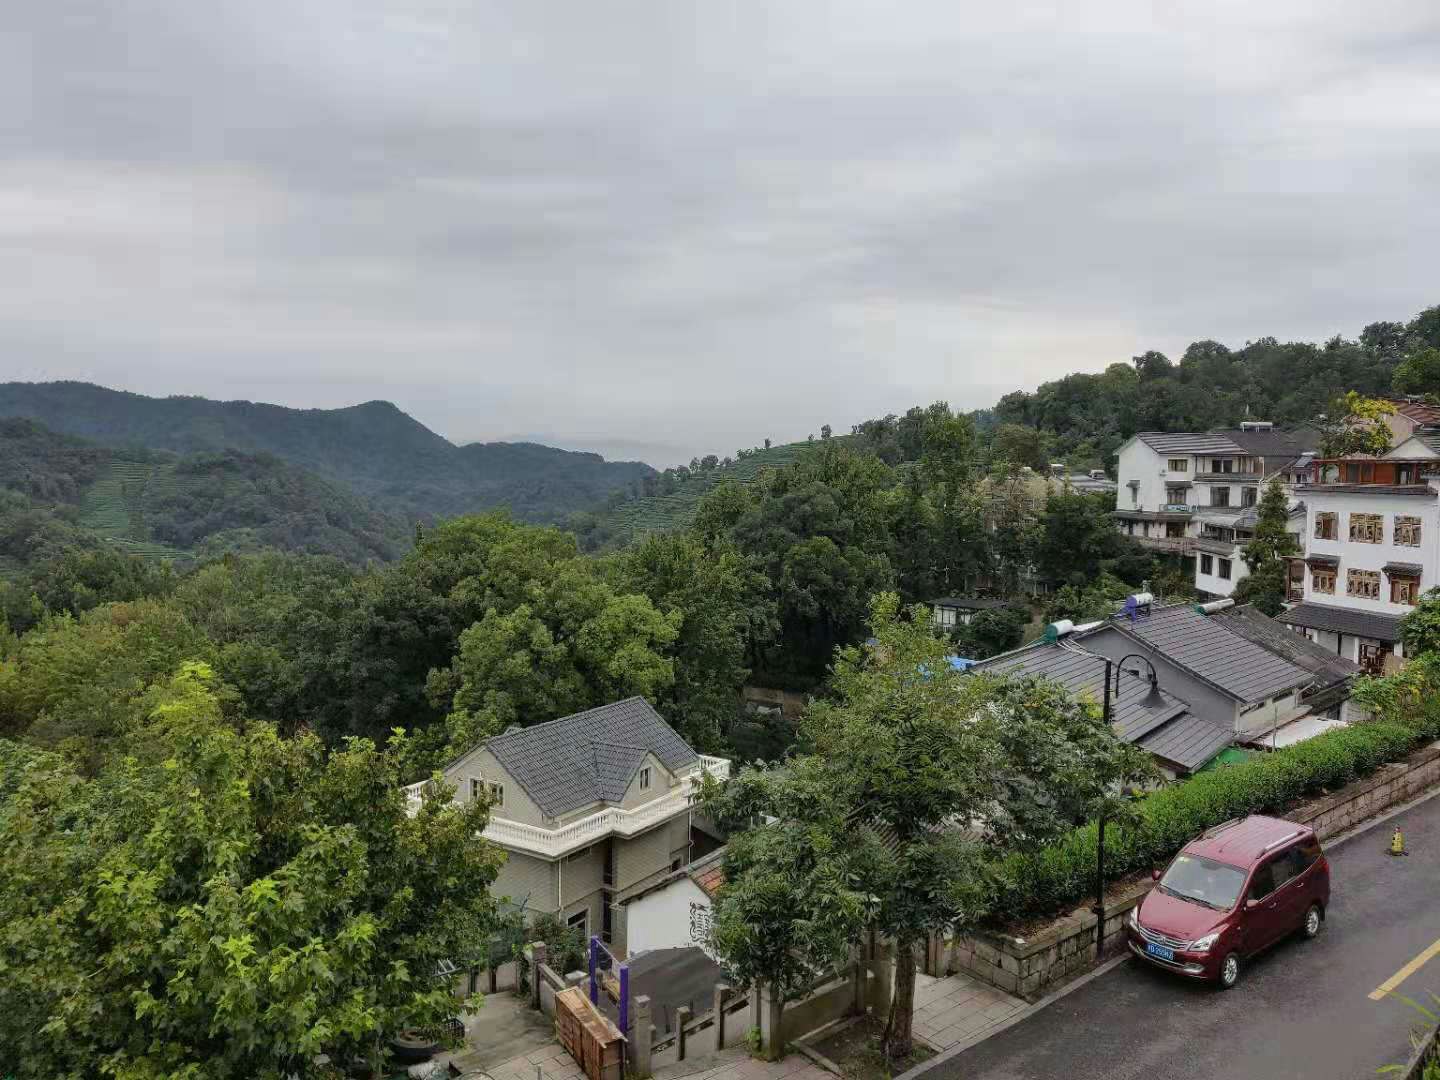 A view down to several houses along a street and towards mountains with tea bushes beyond